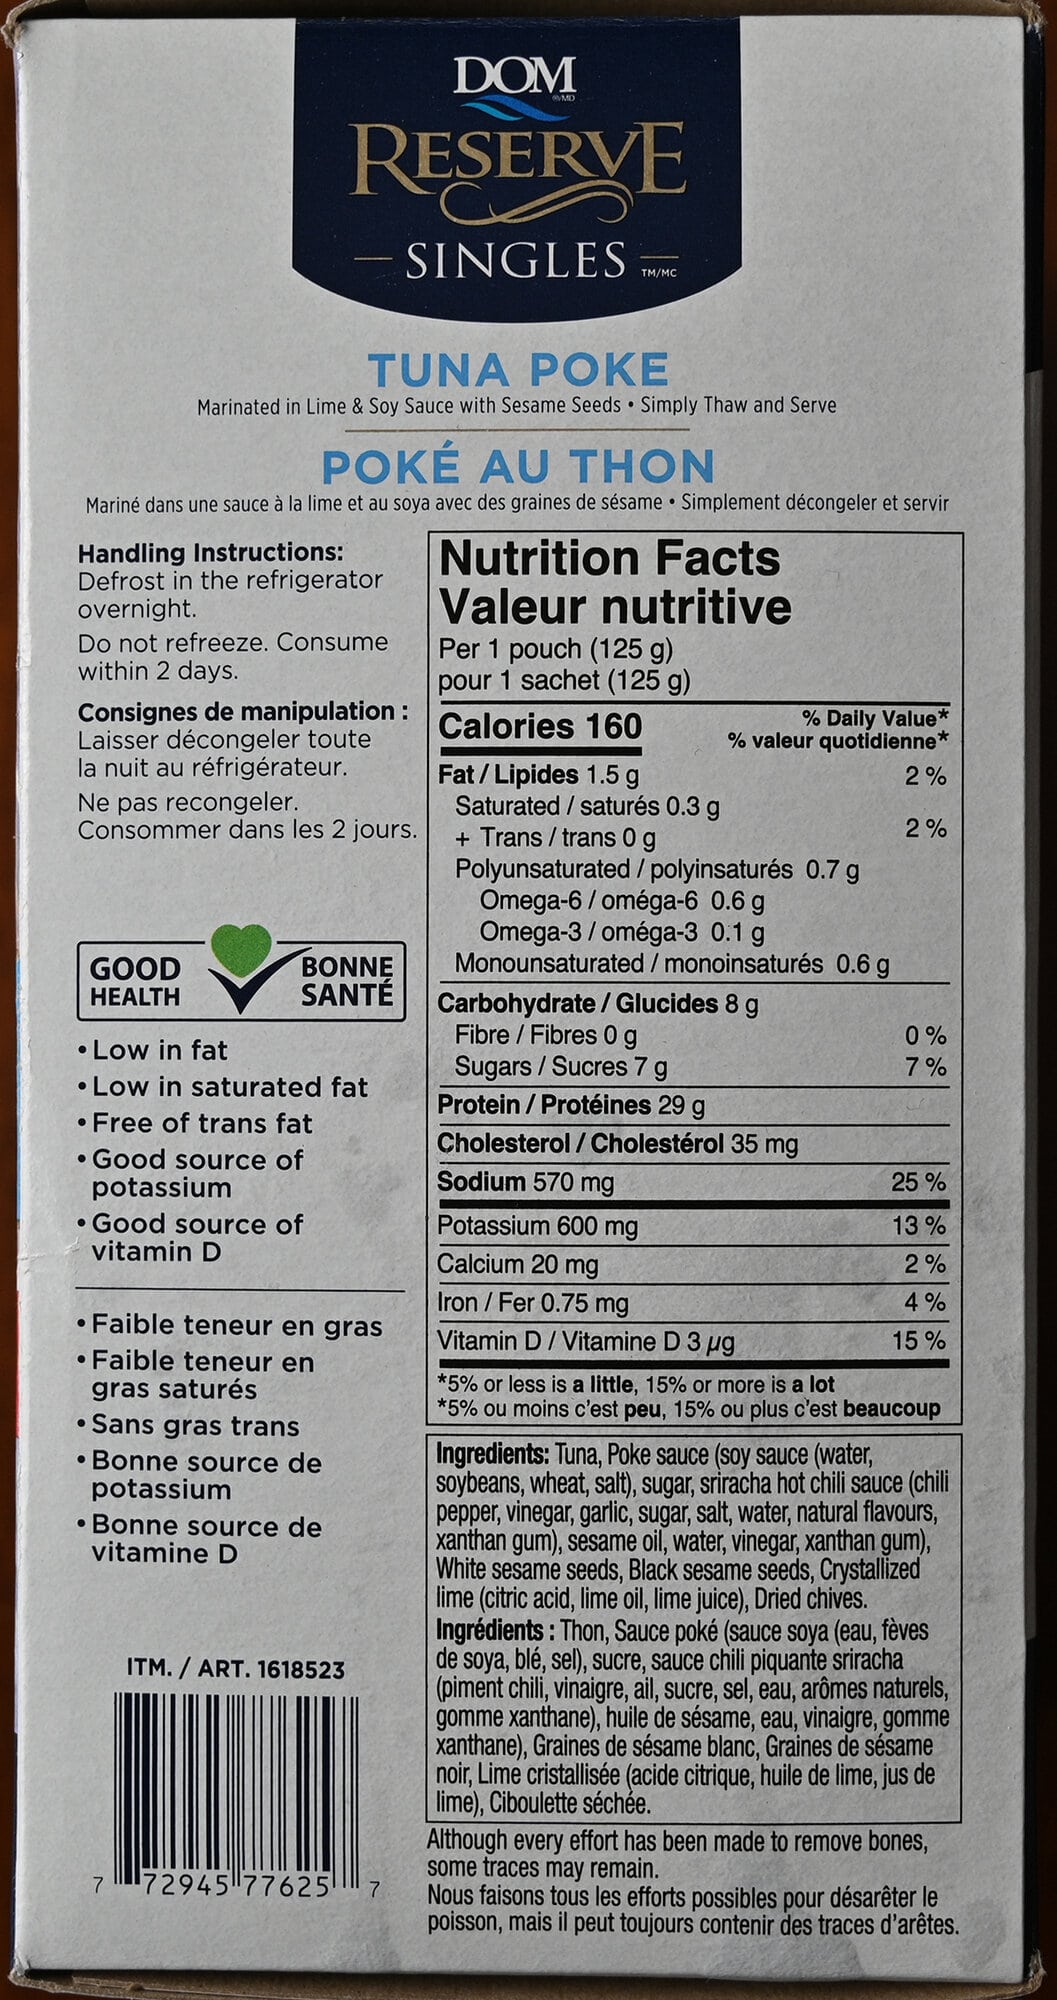 Image of the back of the box of tuna poke showing ingredients, nutrition facts and handling instructions.